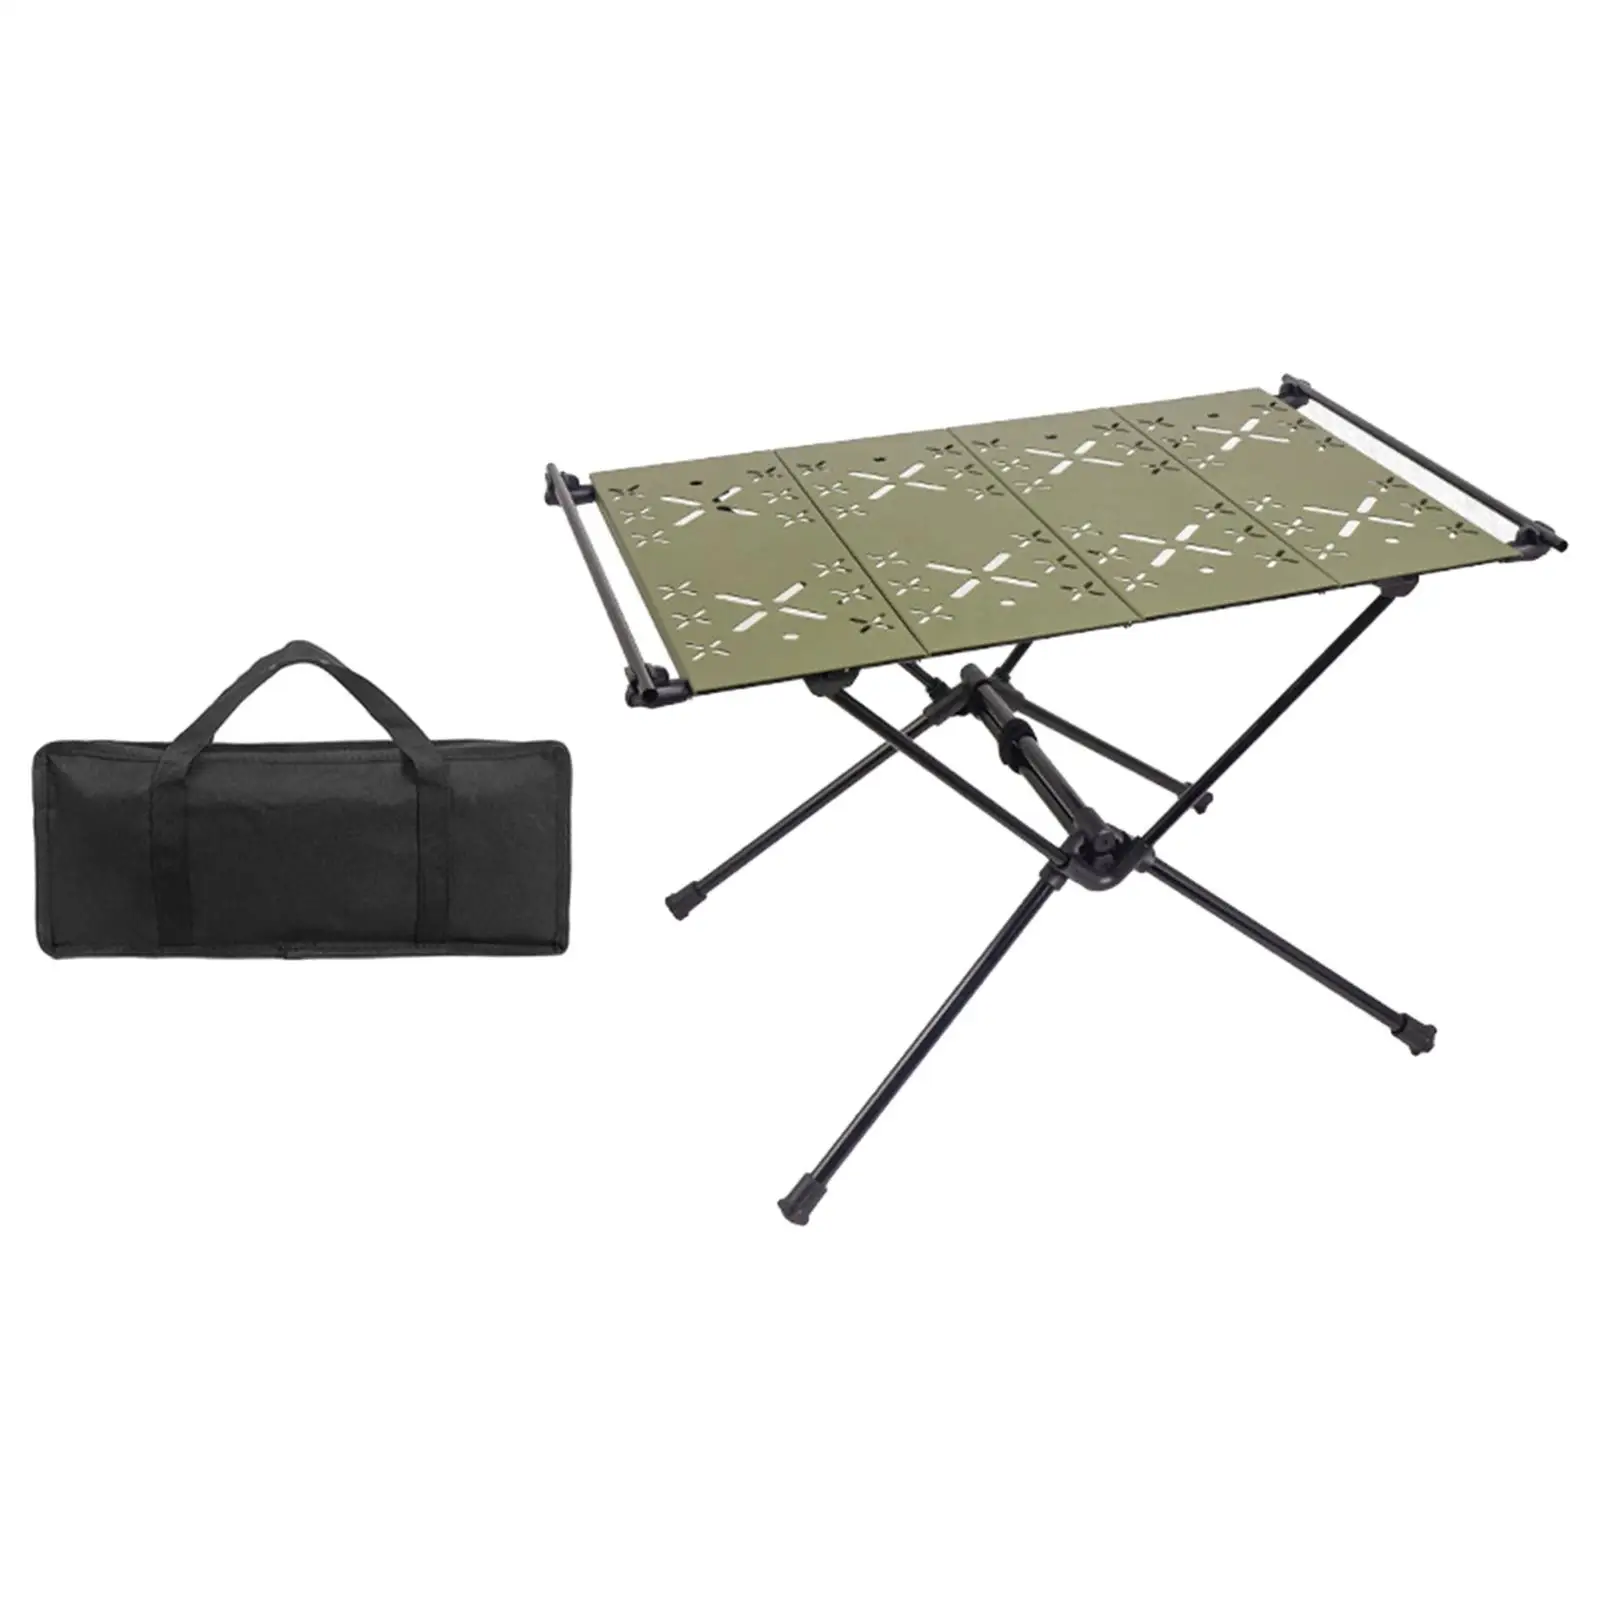 Foldable Camping Table with Storage Bag Aluminum Alloy Camp Table Portable Desk for Travel Backyard Backpacking Picnic Hiking